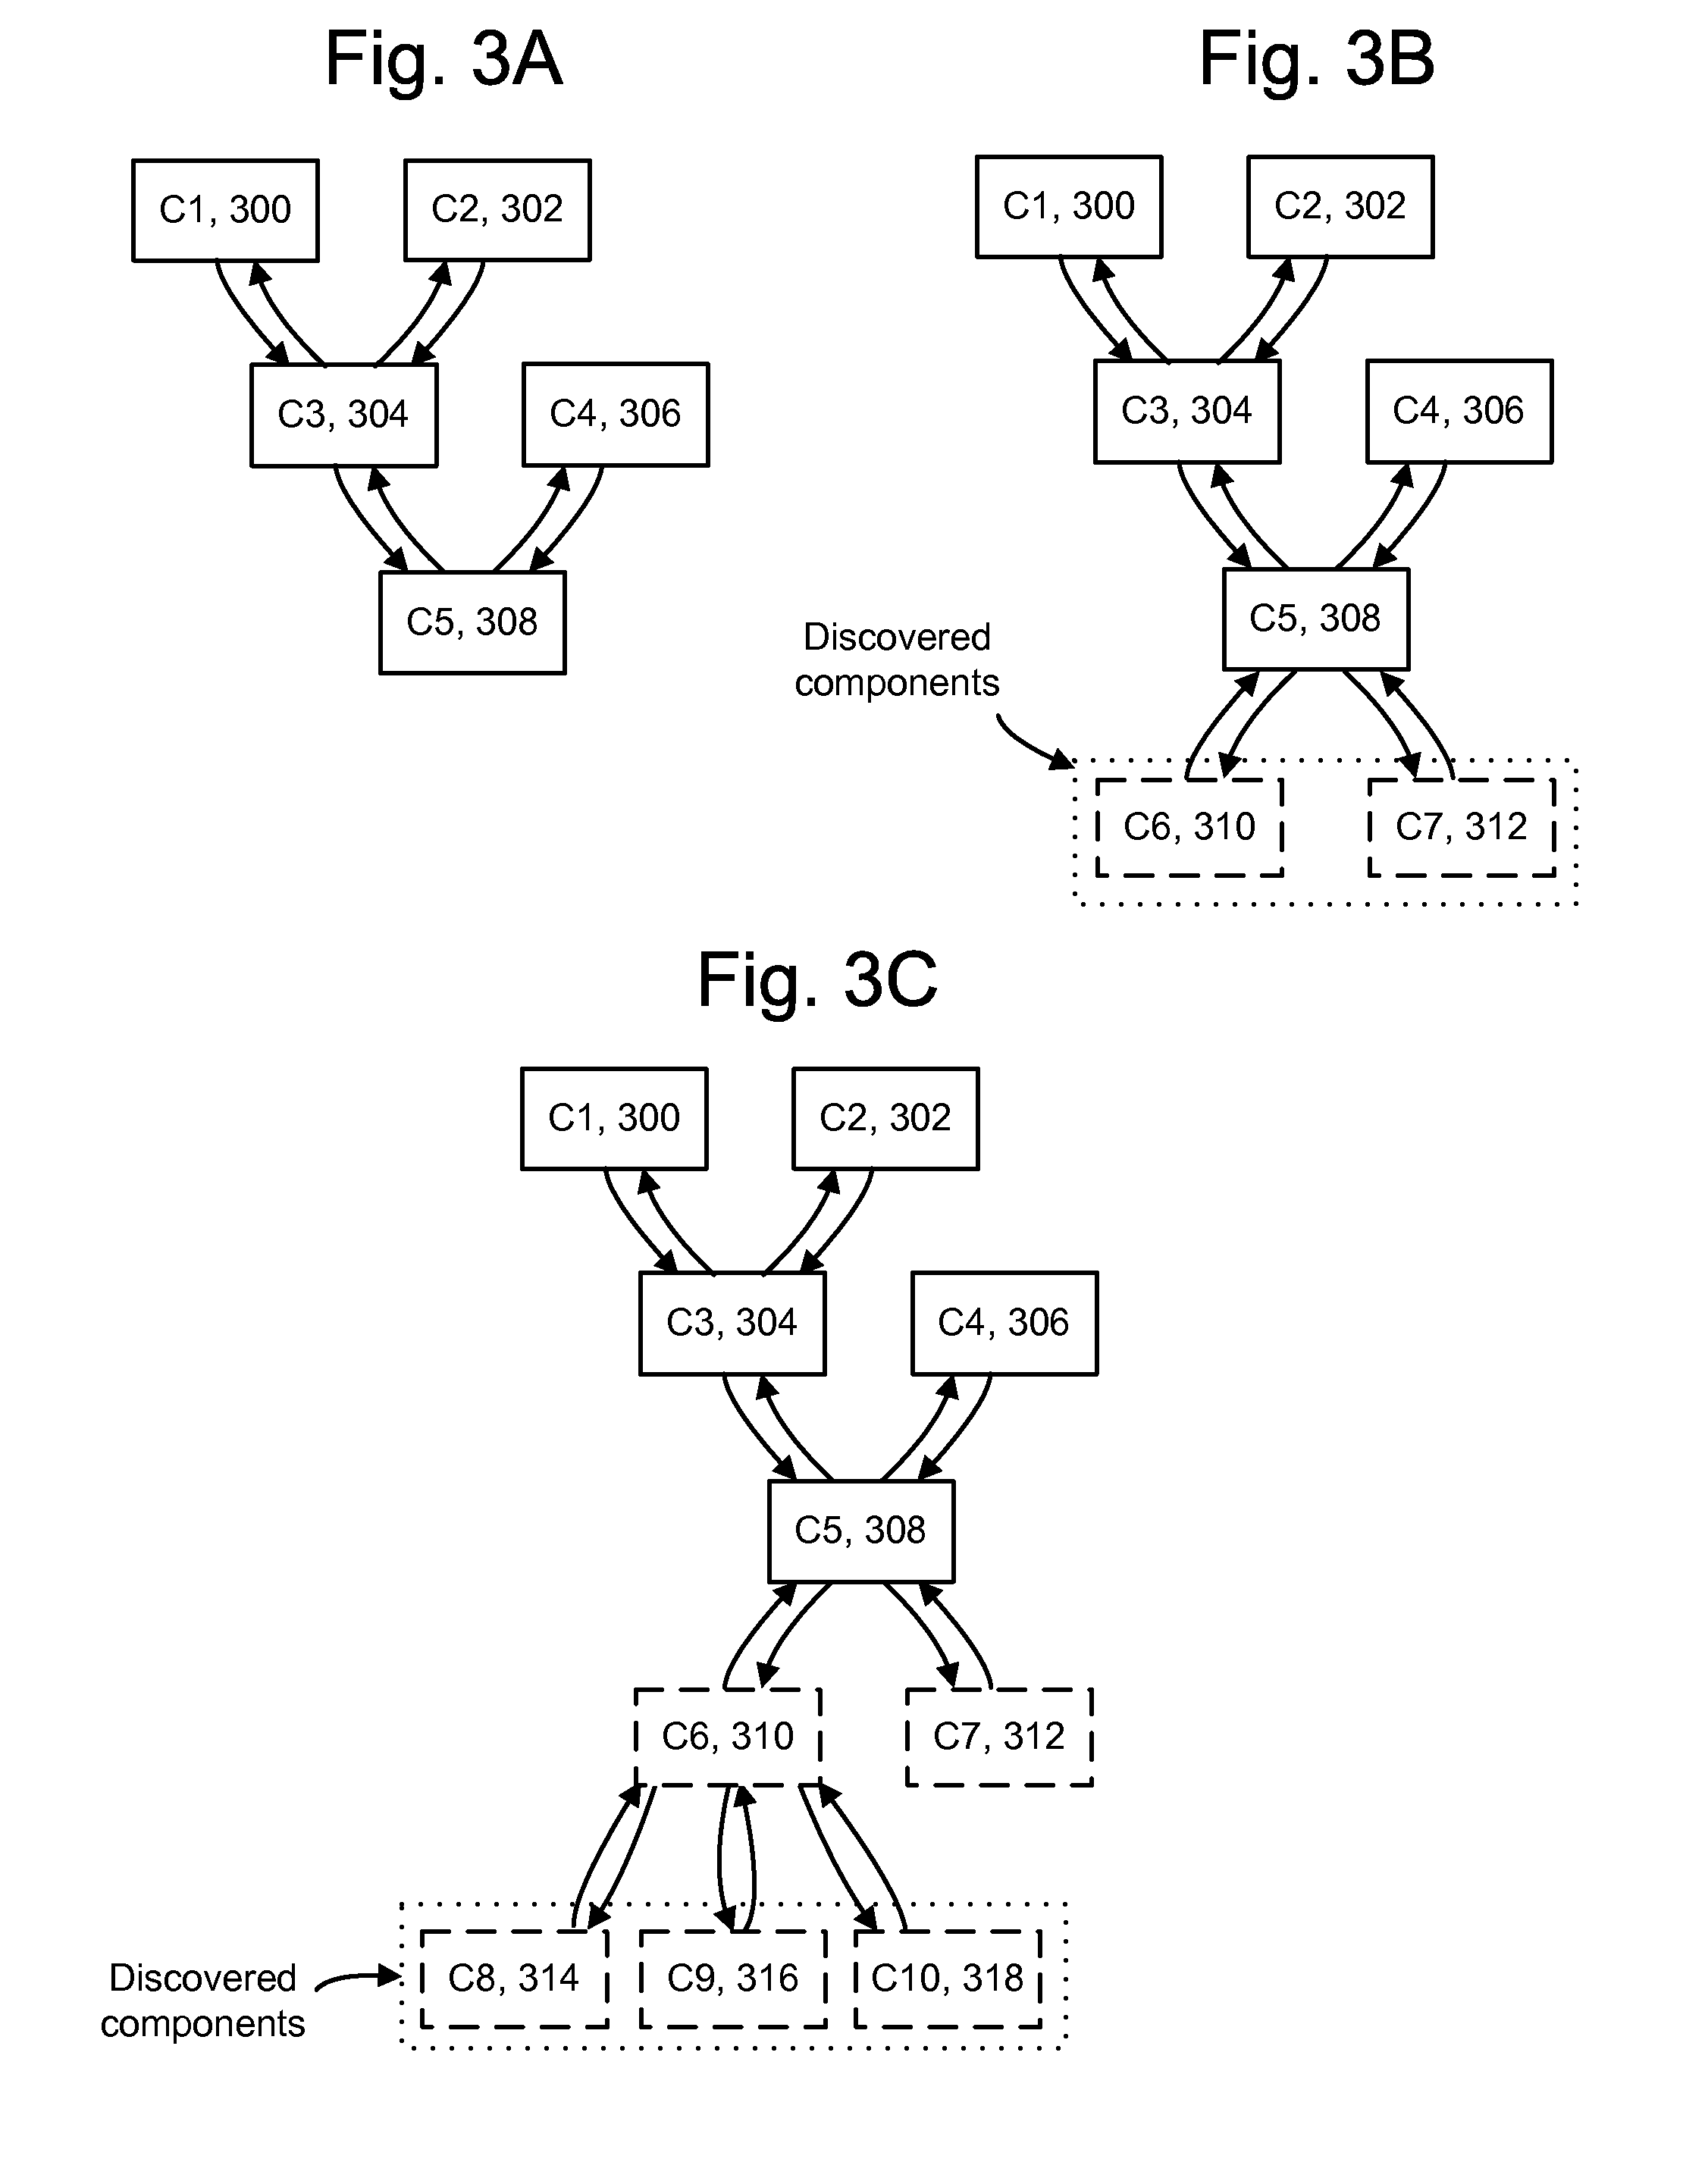 Conditional dynamic instrumentation of software in a specified transaction context